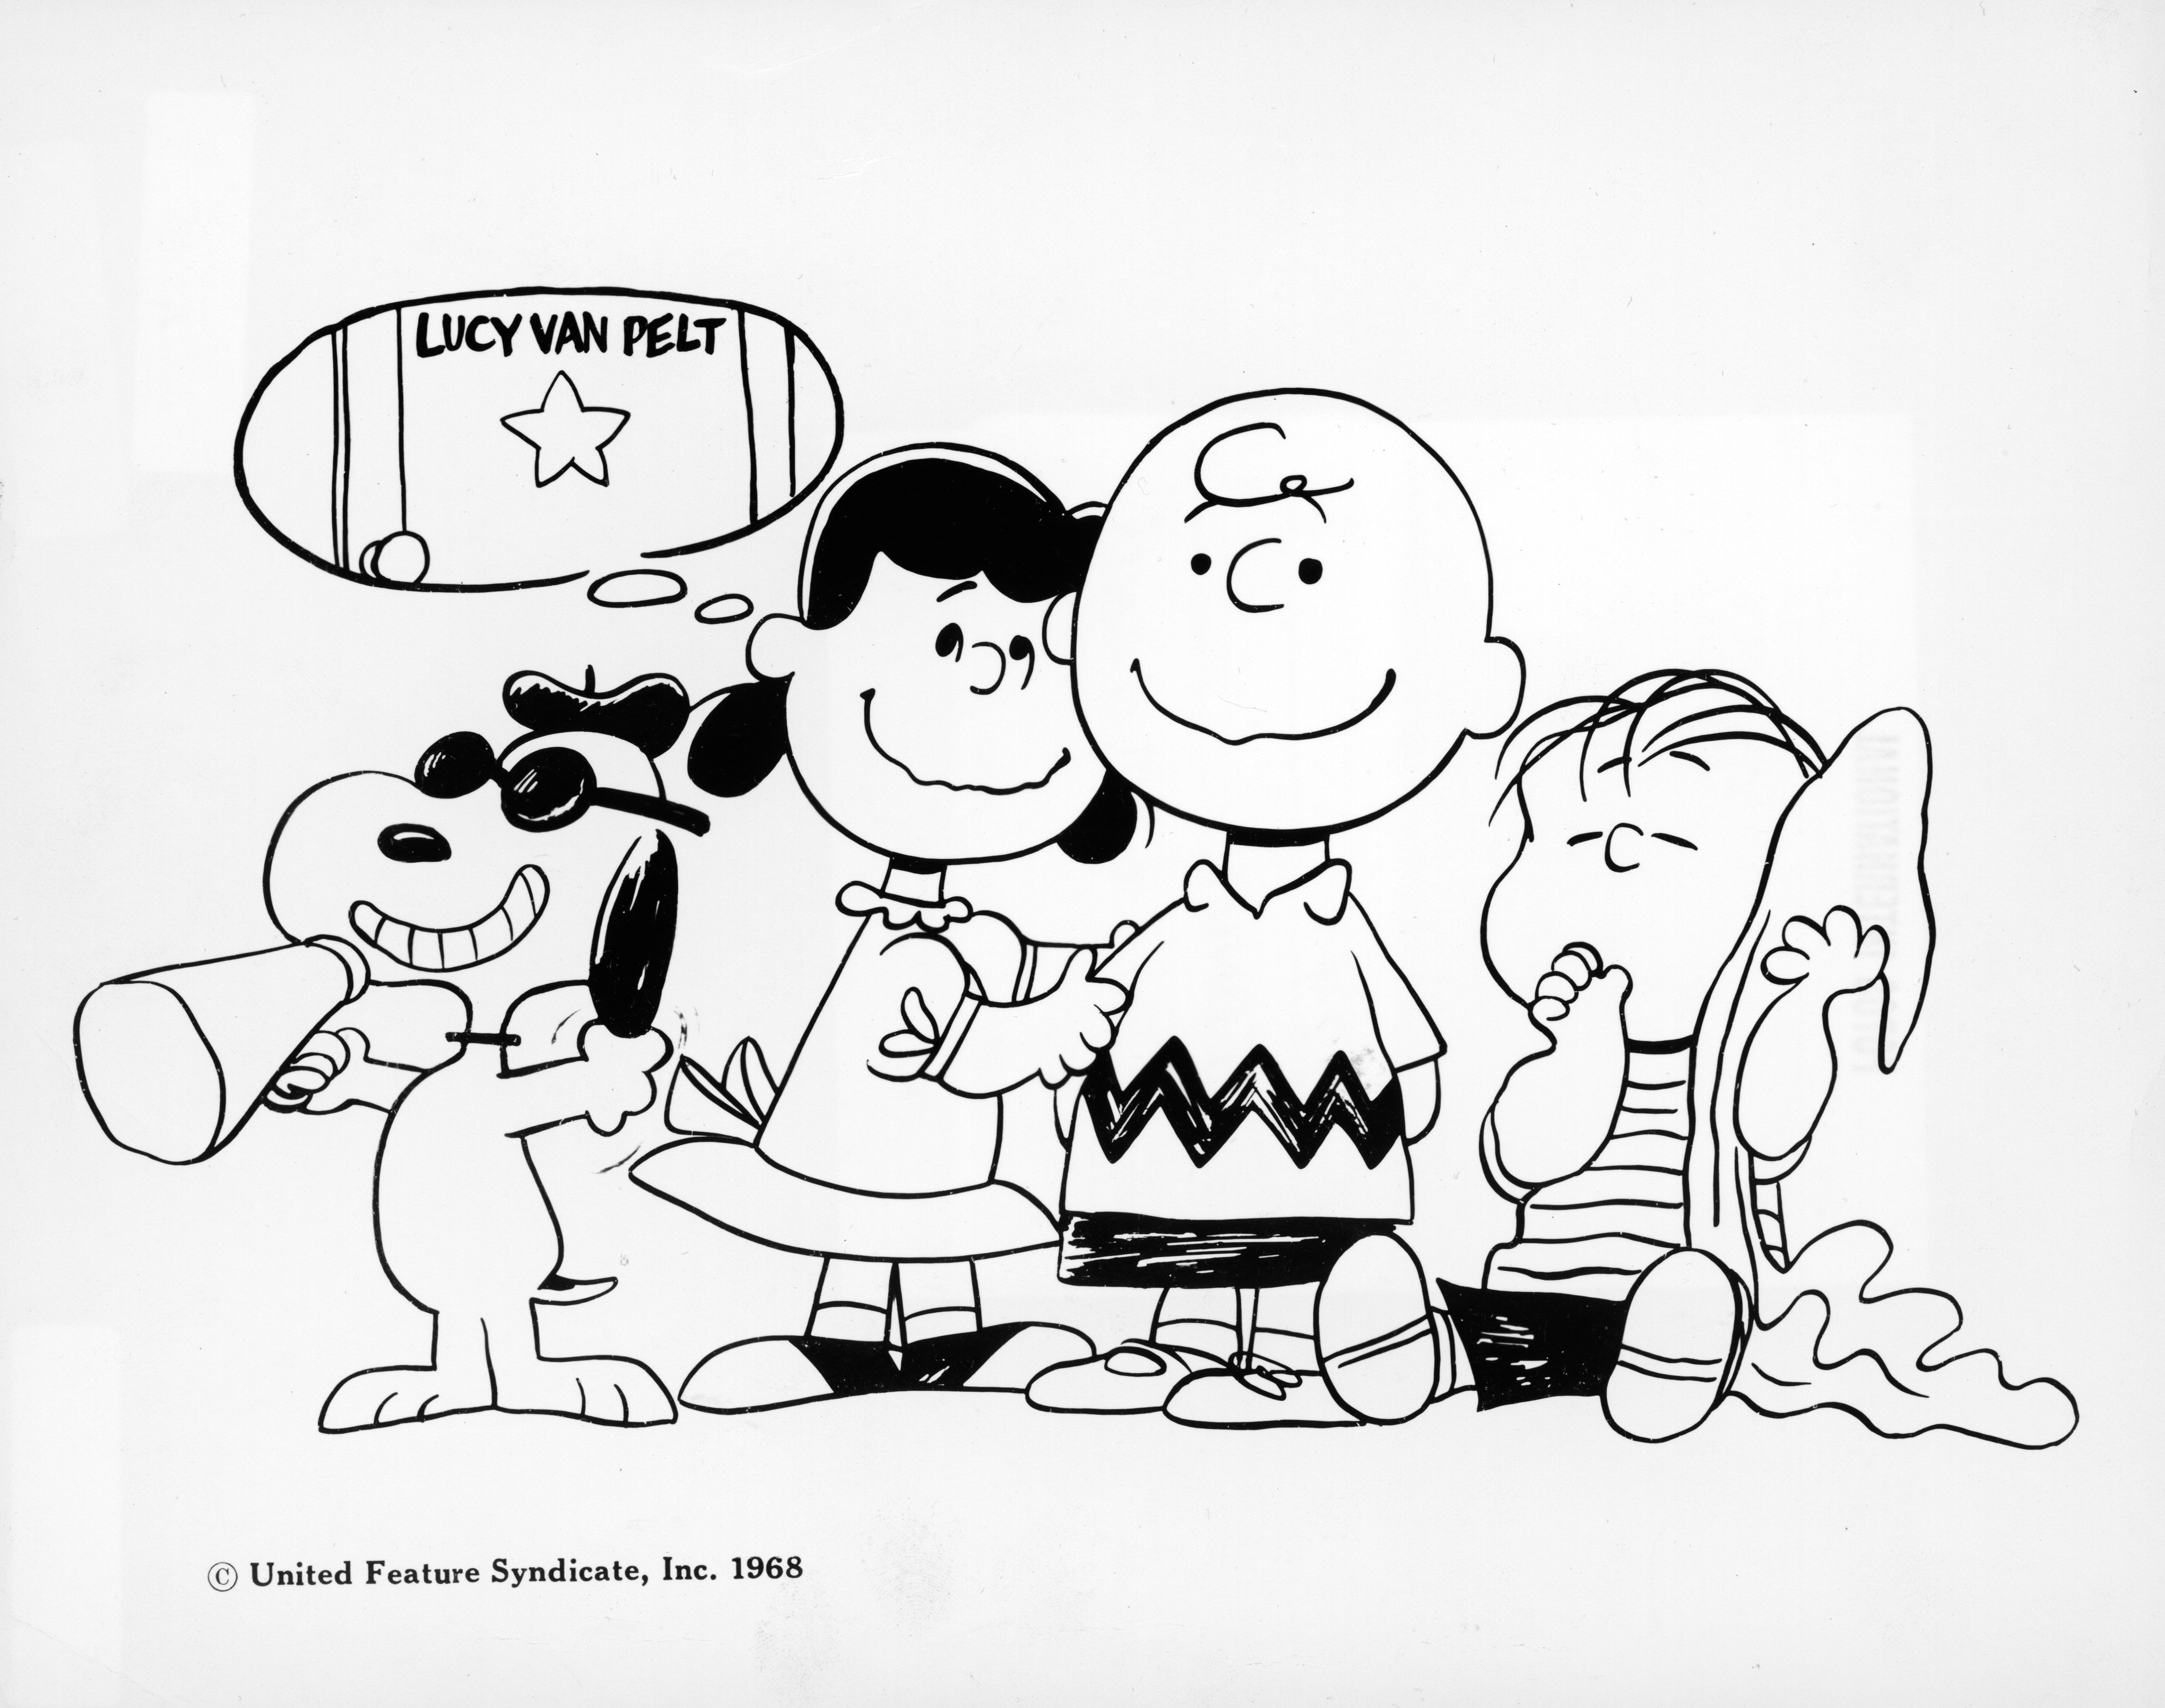 Snoopy, Lucy. Charlie Brown, and Linus stand in a line in a drawing from the Charles Schultz comic strip, 'Peanuts'